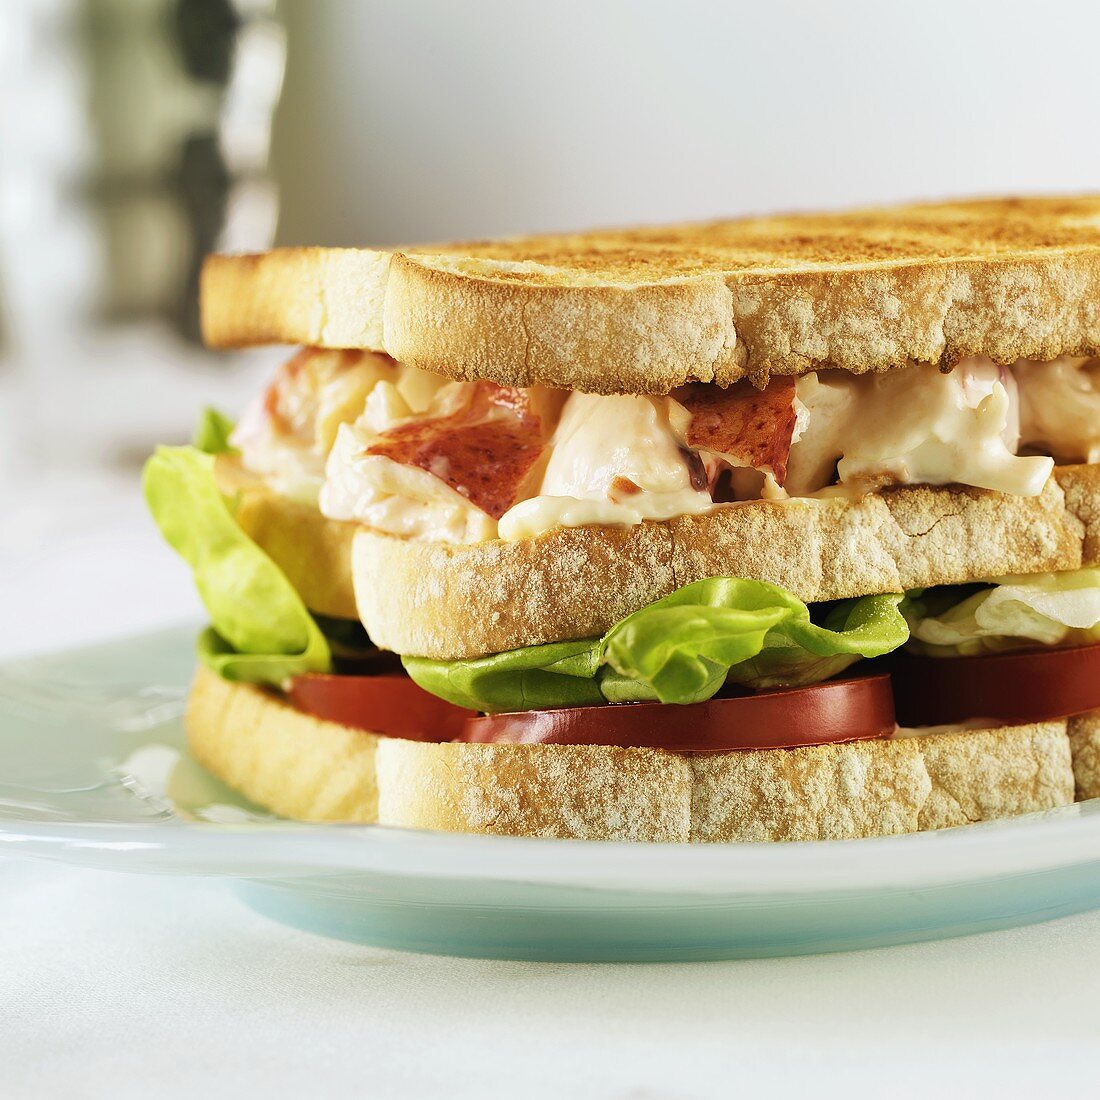 A Lobster Sandwich on Toasted Bread with Lettuce and Tomato